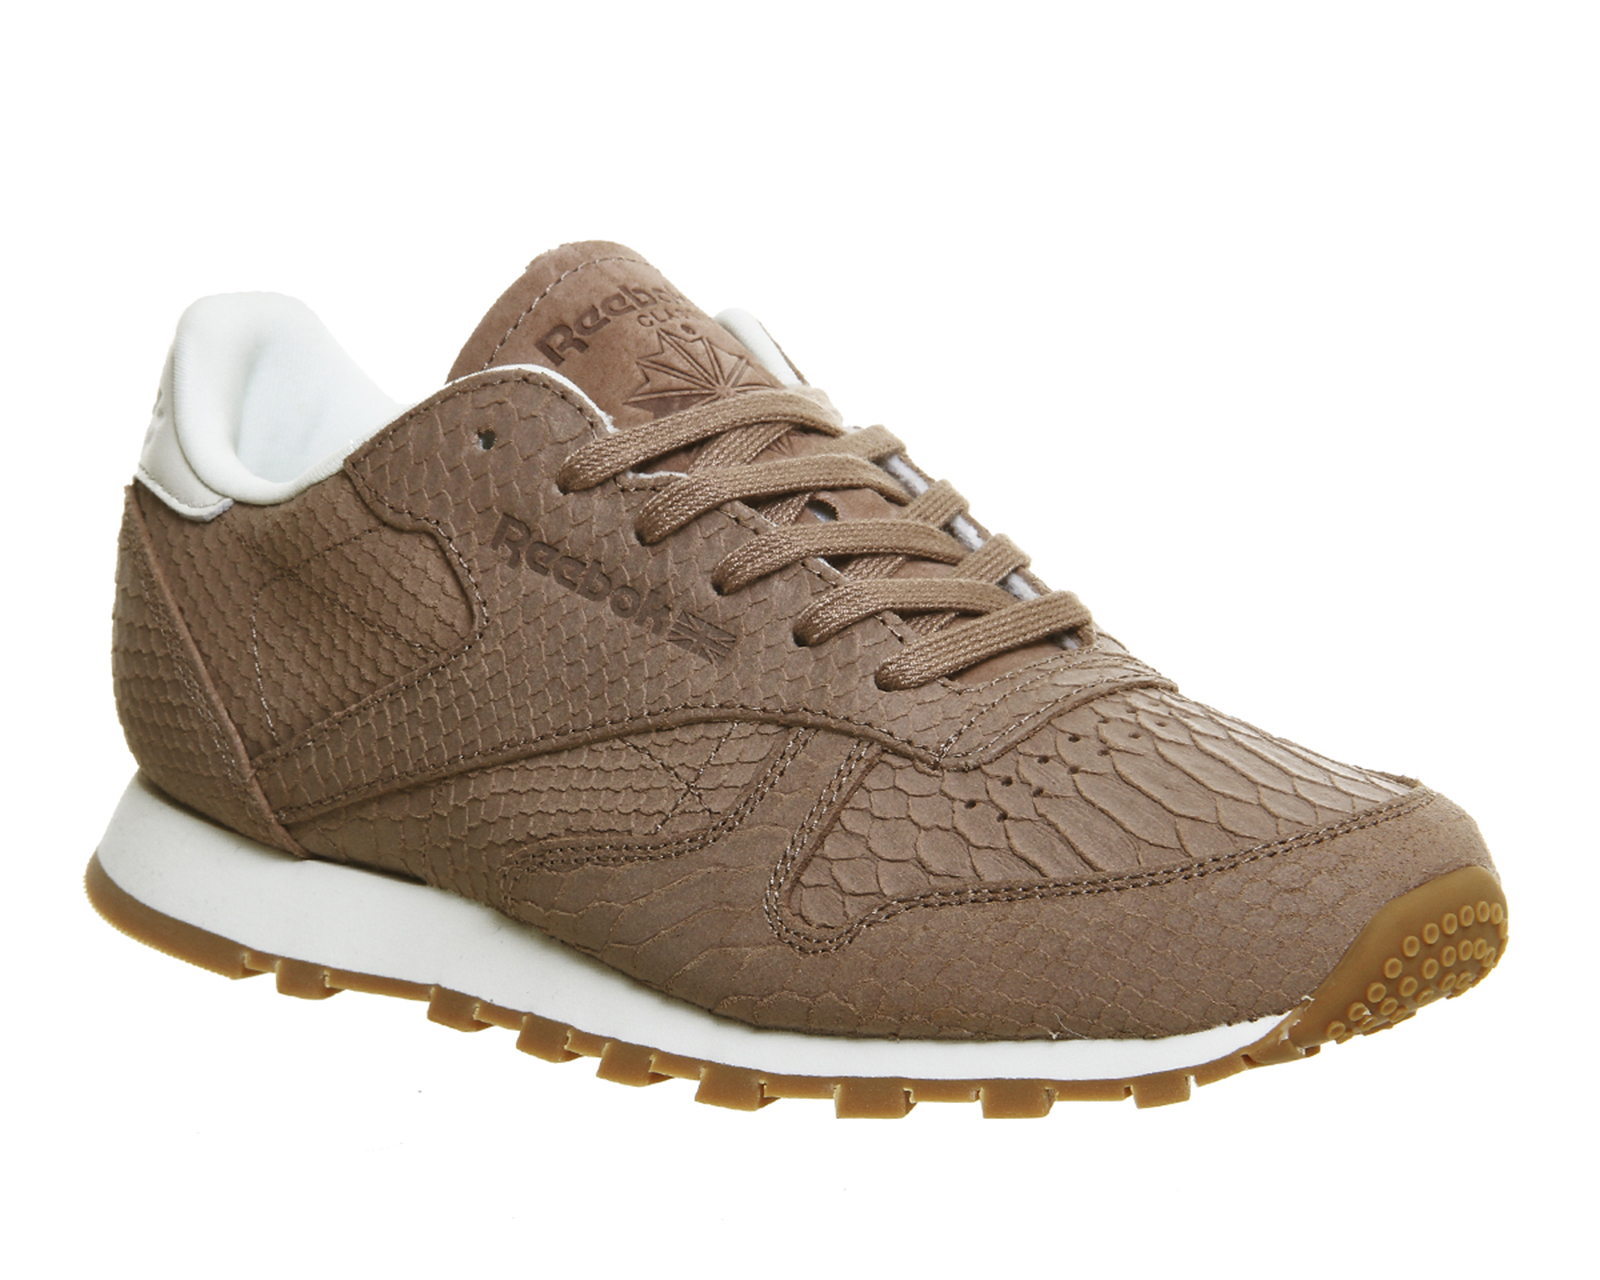 ReebokCl Leather Clean (w)Taupe Chalk Extoics